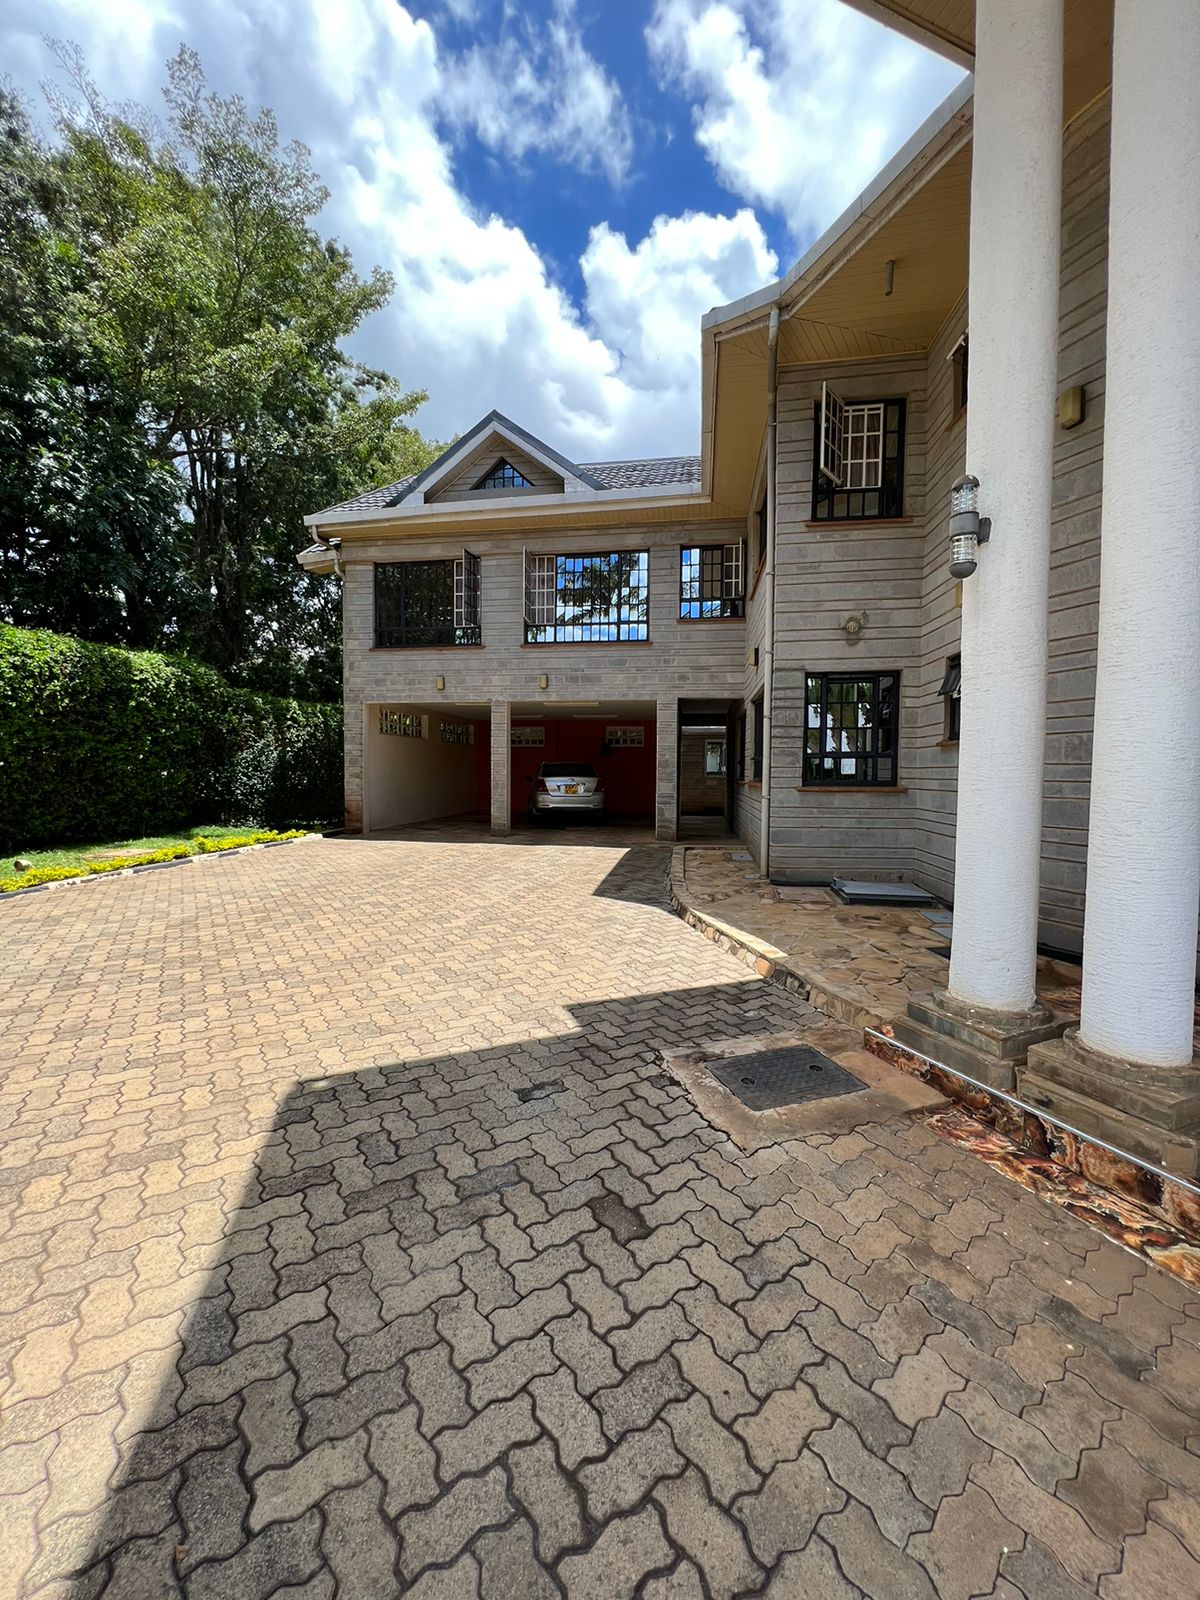 Runda 6 bedroom house all bedroom en-suite on 0.5 Acres. Master with a balcony and study/ Sale at 150Million. Musili Homes